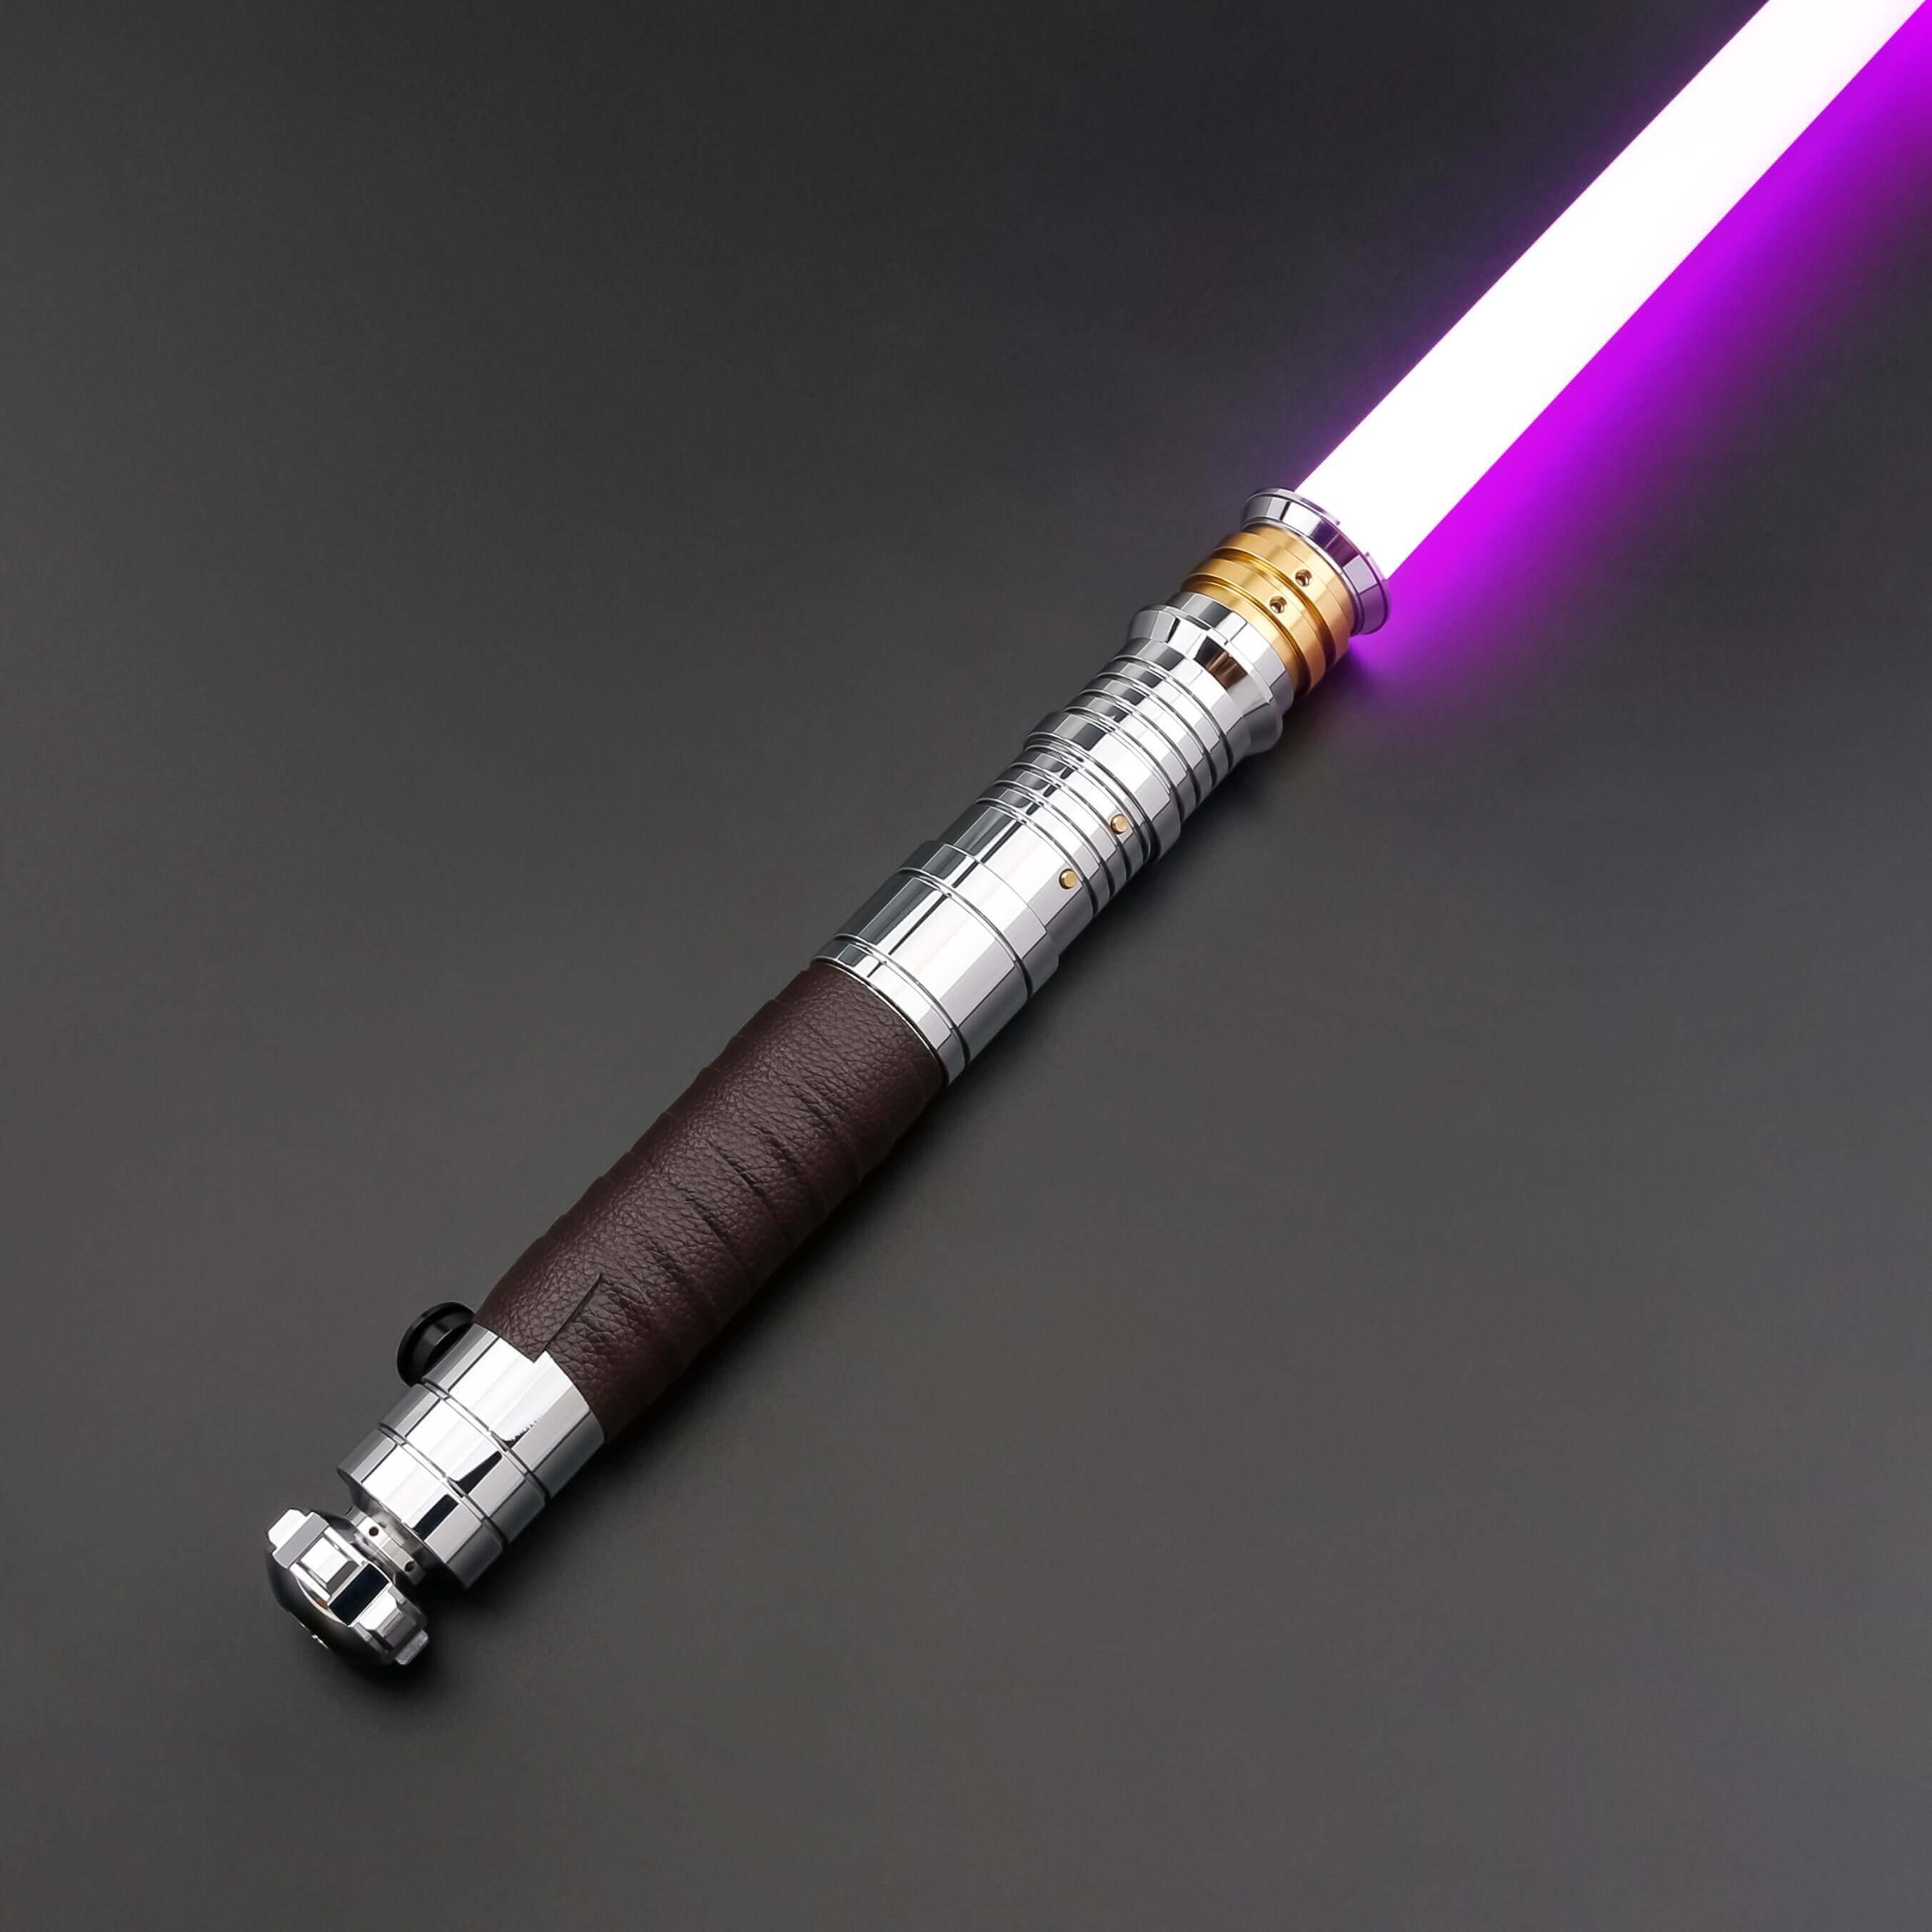 Revan Lightsaber - The Force's Duality | Nsabers